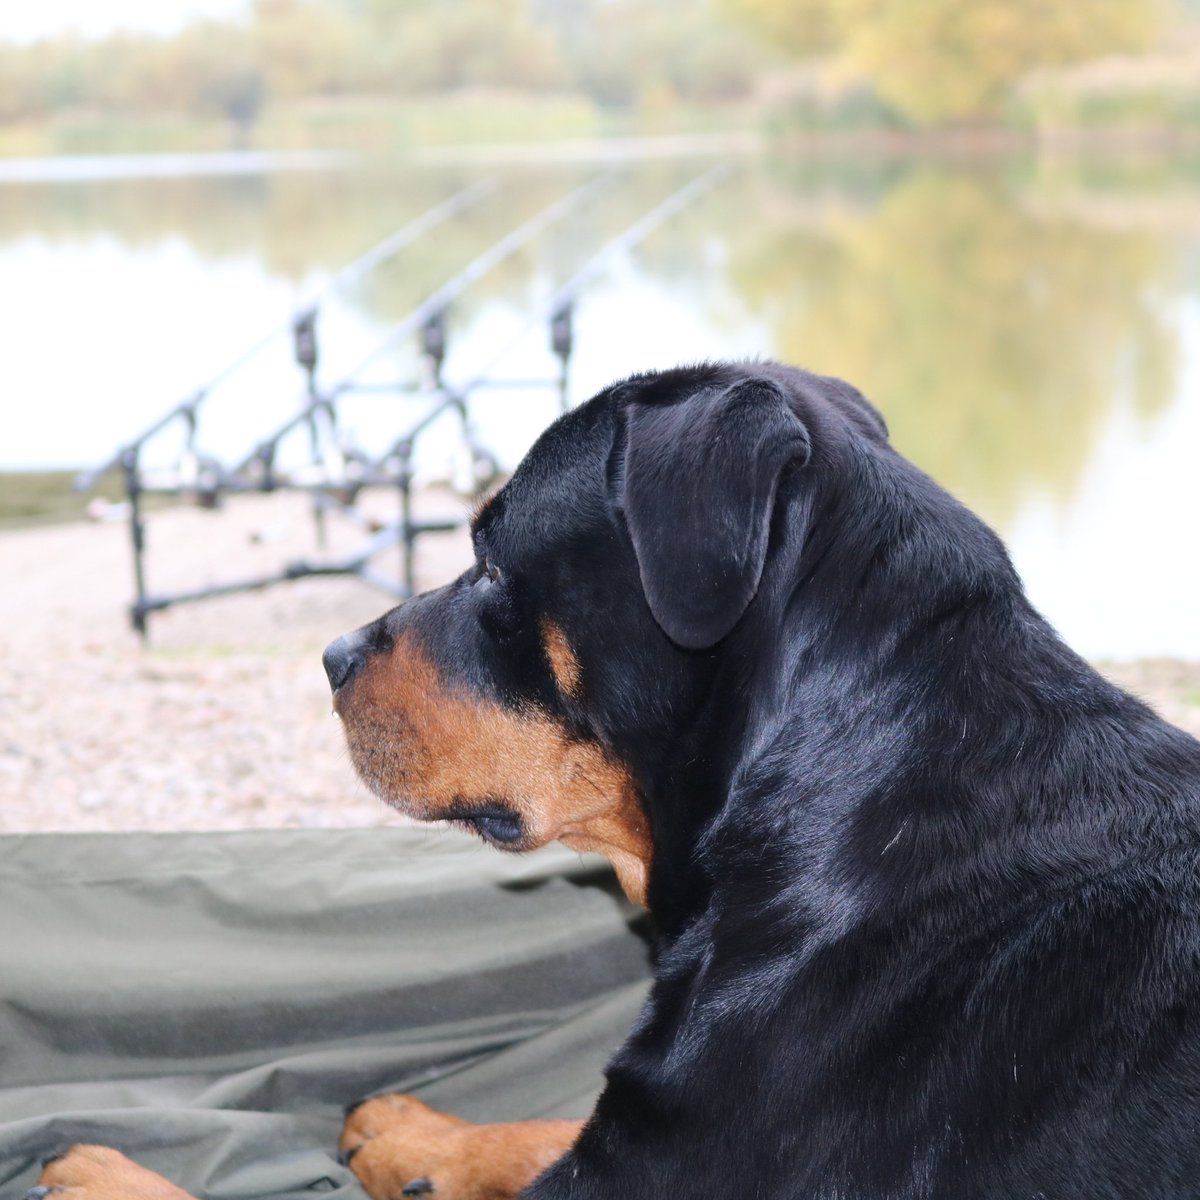 Only her 3rd time but she loves it. 
#CarpDog
#CarpFishing 
#TheBirch https://t.co/3hrKgdyWIL